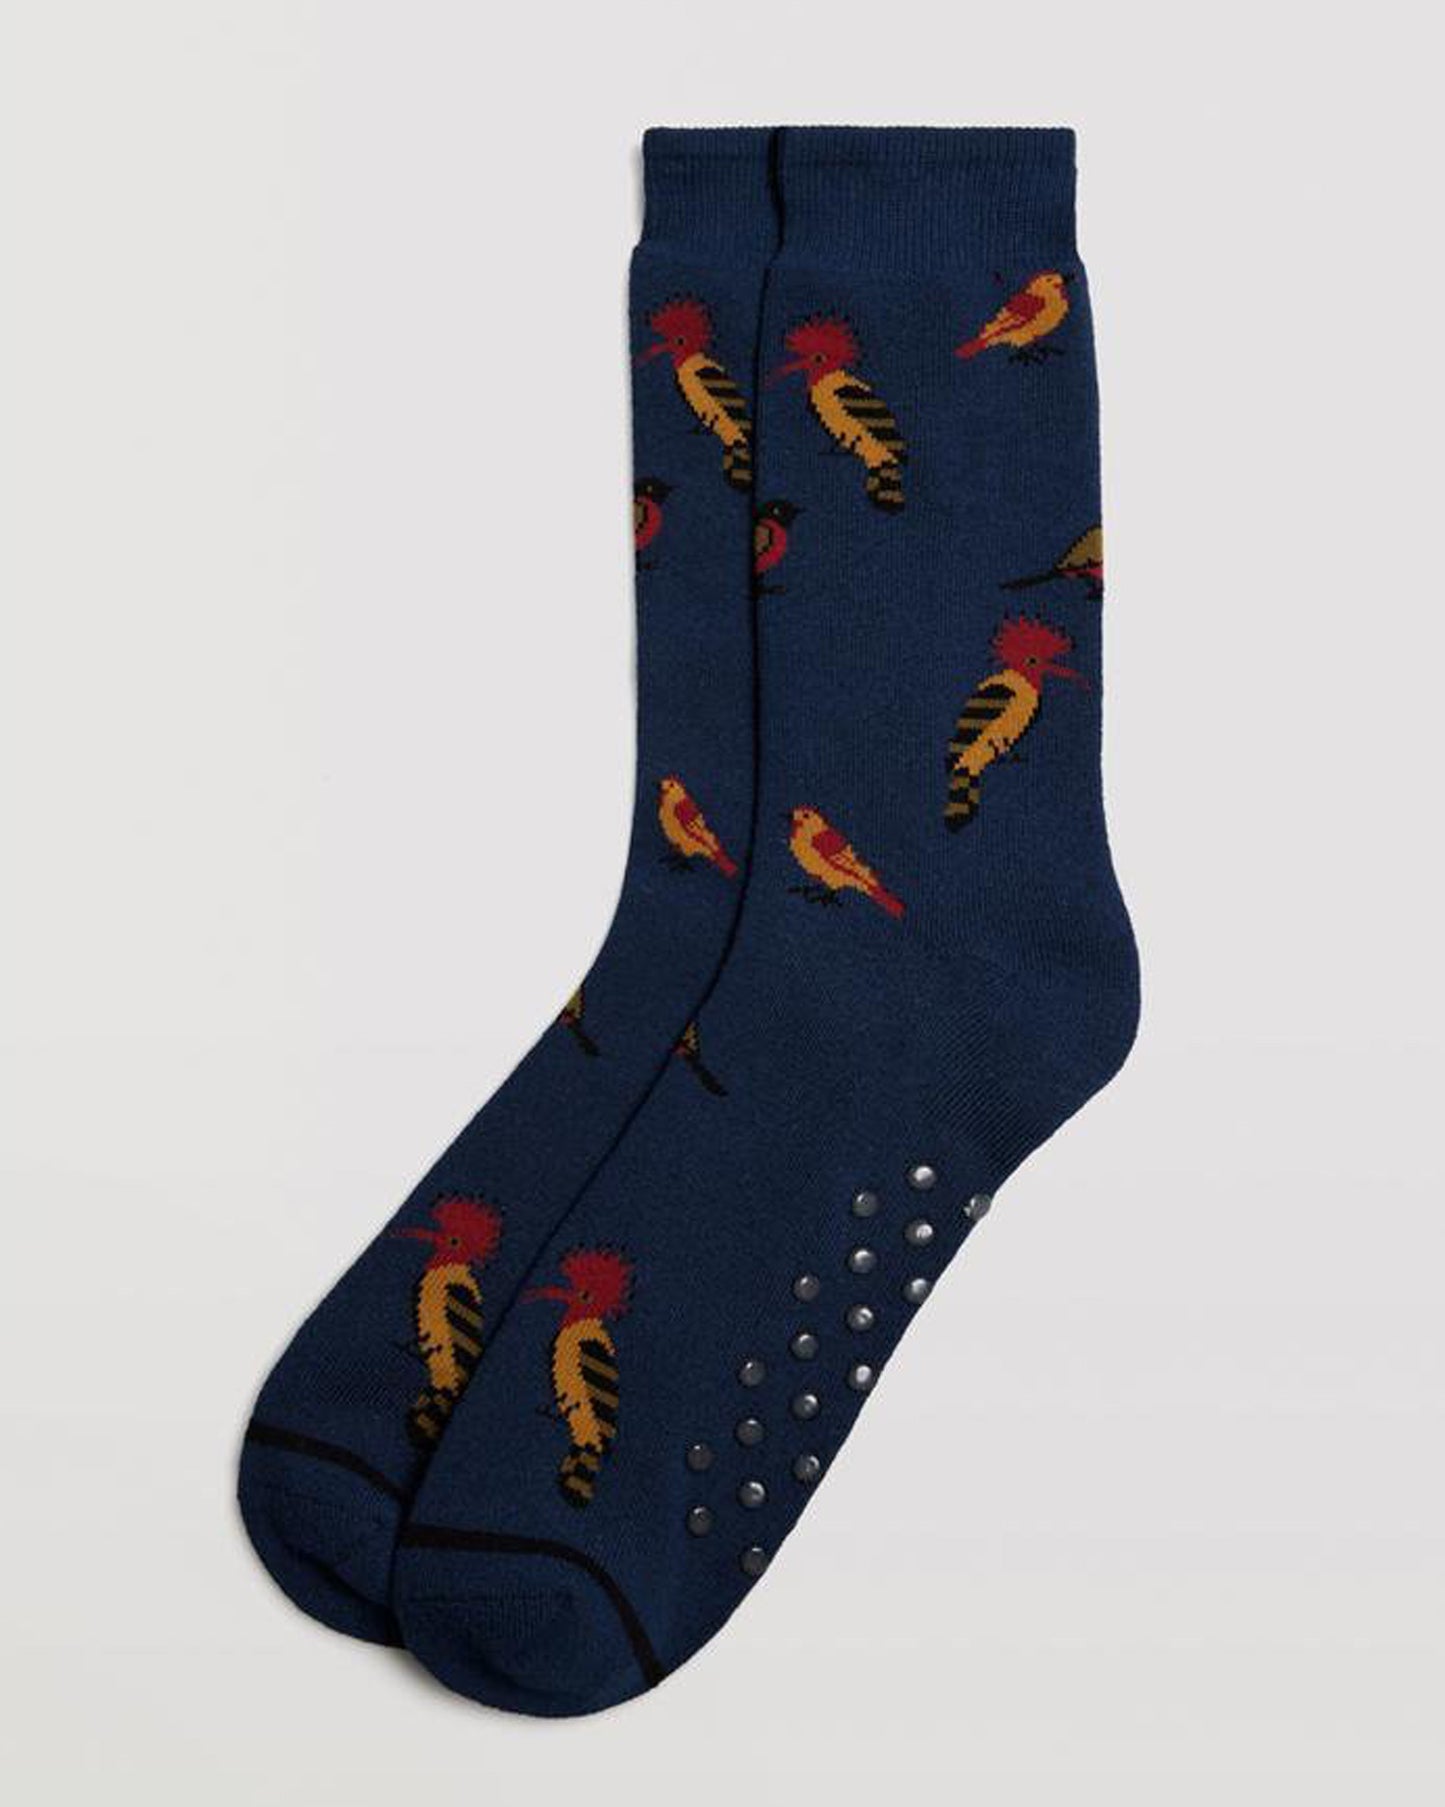 Ysabel Mora 22888 Bird Slipper Socks - Navy blue thick and warm terry lined cotton mix crew length ankle socks with an all over exotic birds pattern in red, mustard, brown and black, dotted non-slip sole and deep elasticated comfort cuff.